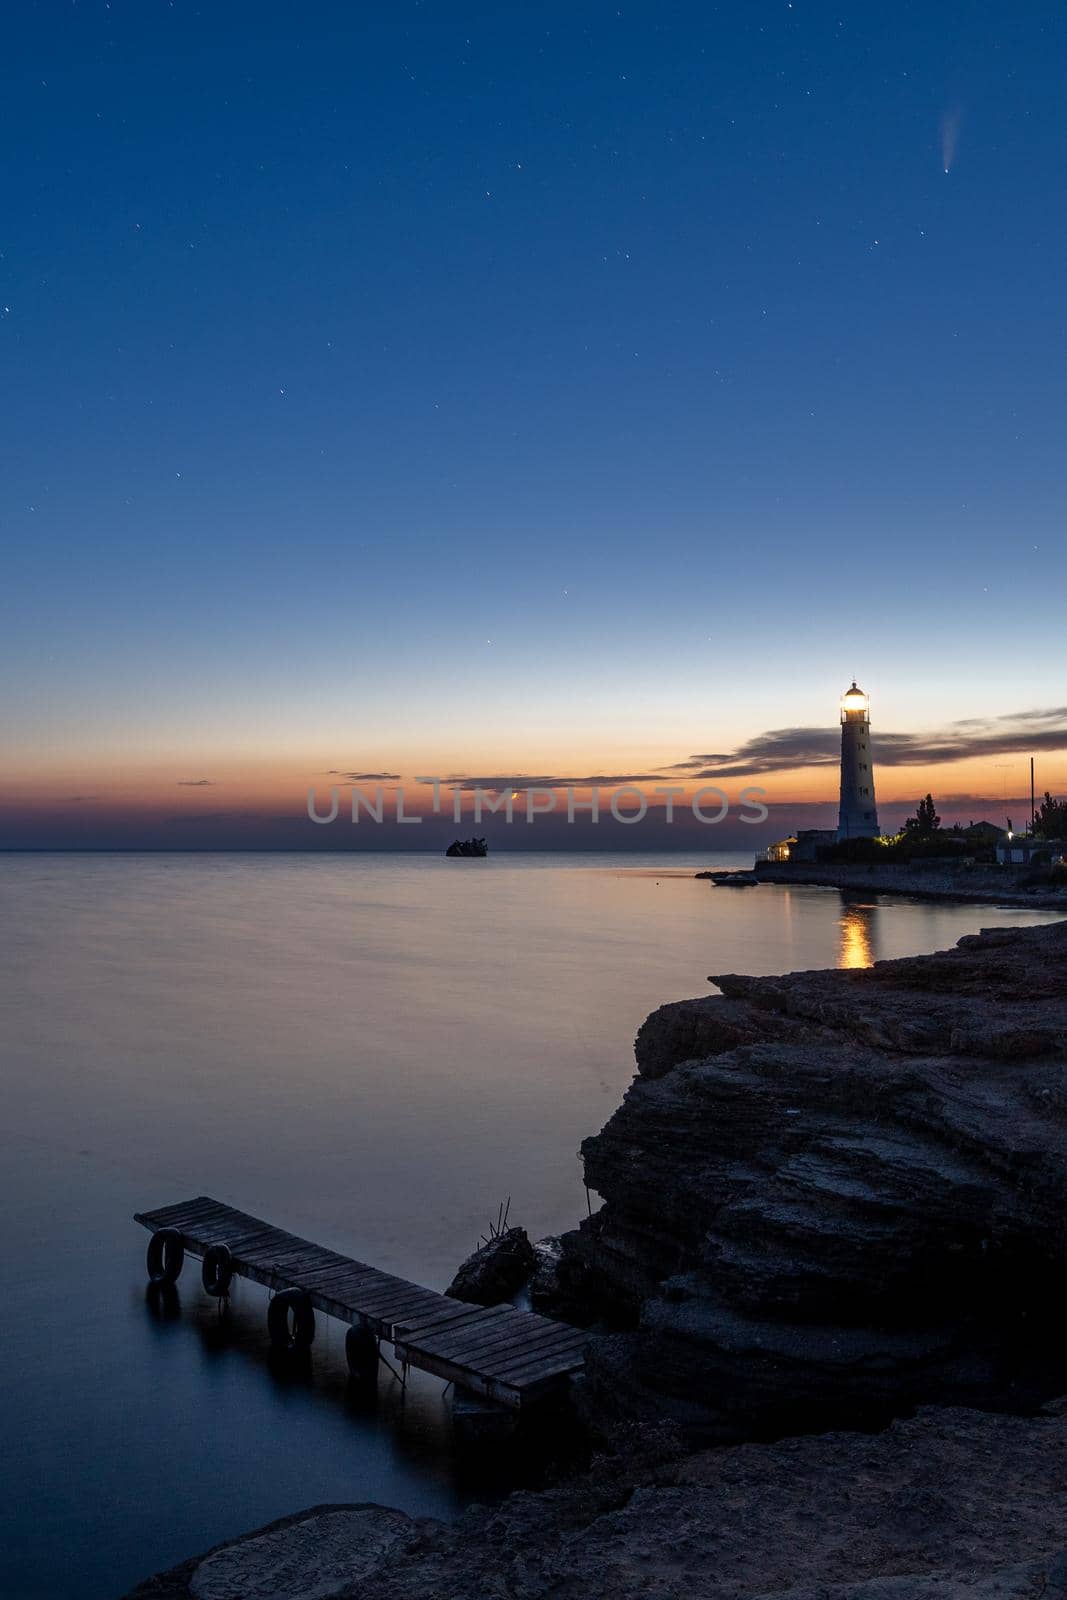 Panoramic HDR Landscape view of Neowise comet over white Lighthouse at night sky. High quality photo